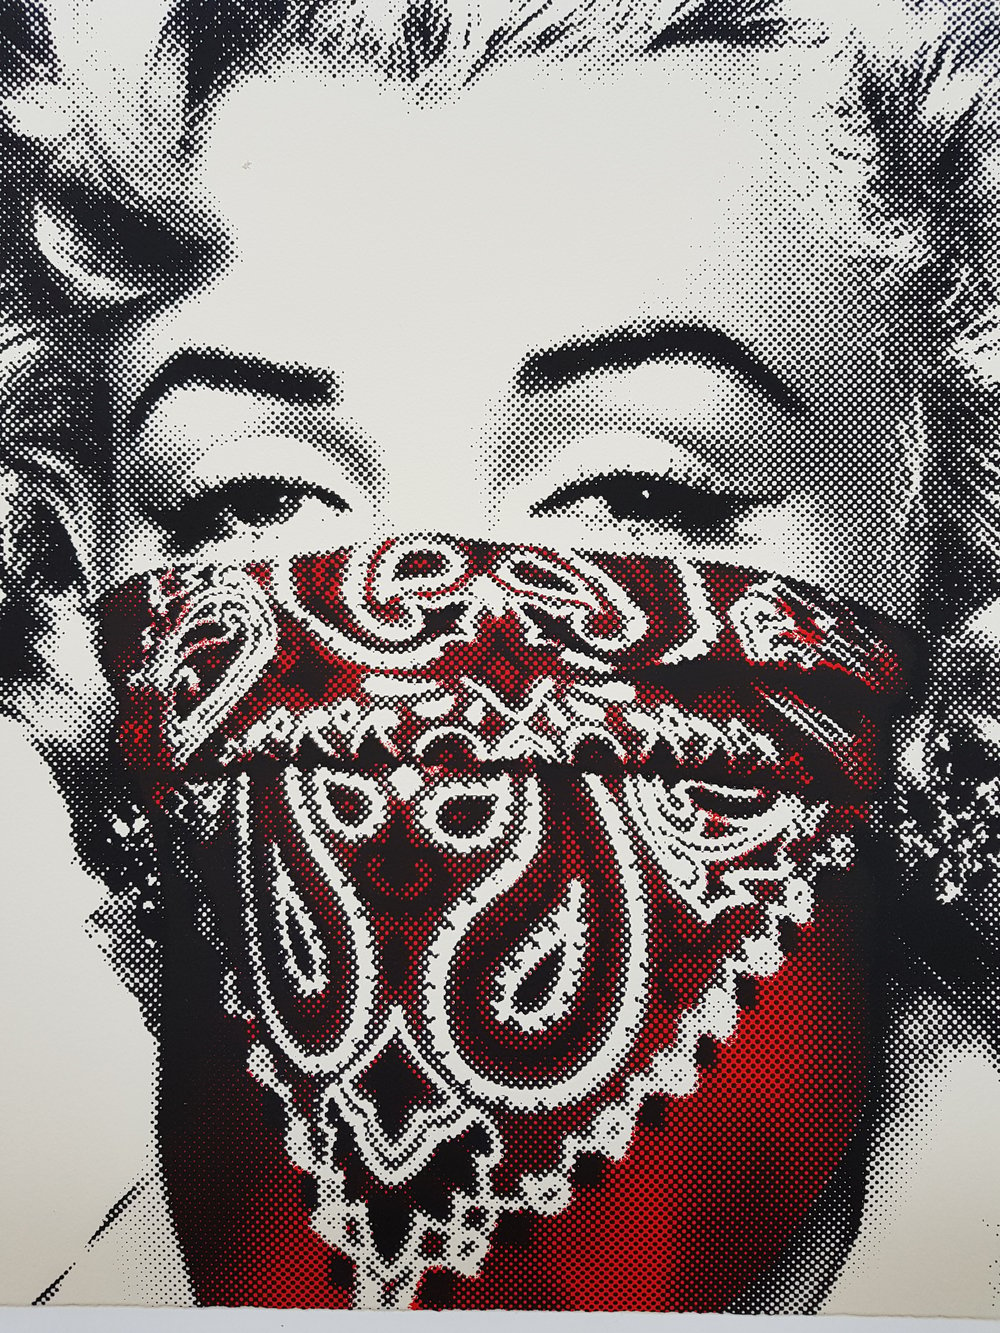 MR BRAINWASH "STAY SAFE" RED - LIMITED EDITION 50 - 2 COLOUR SCREENPRINT